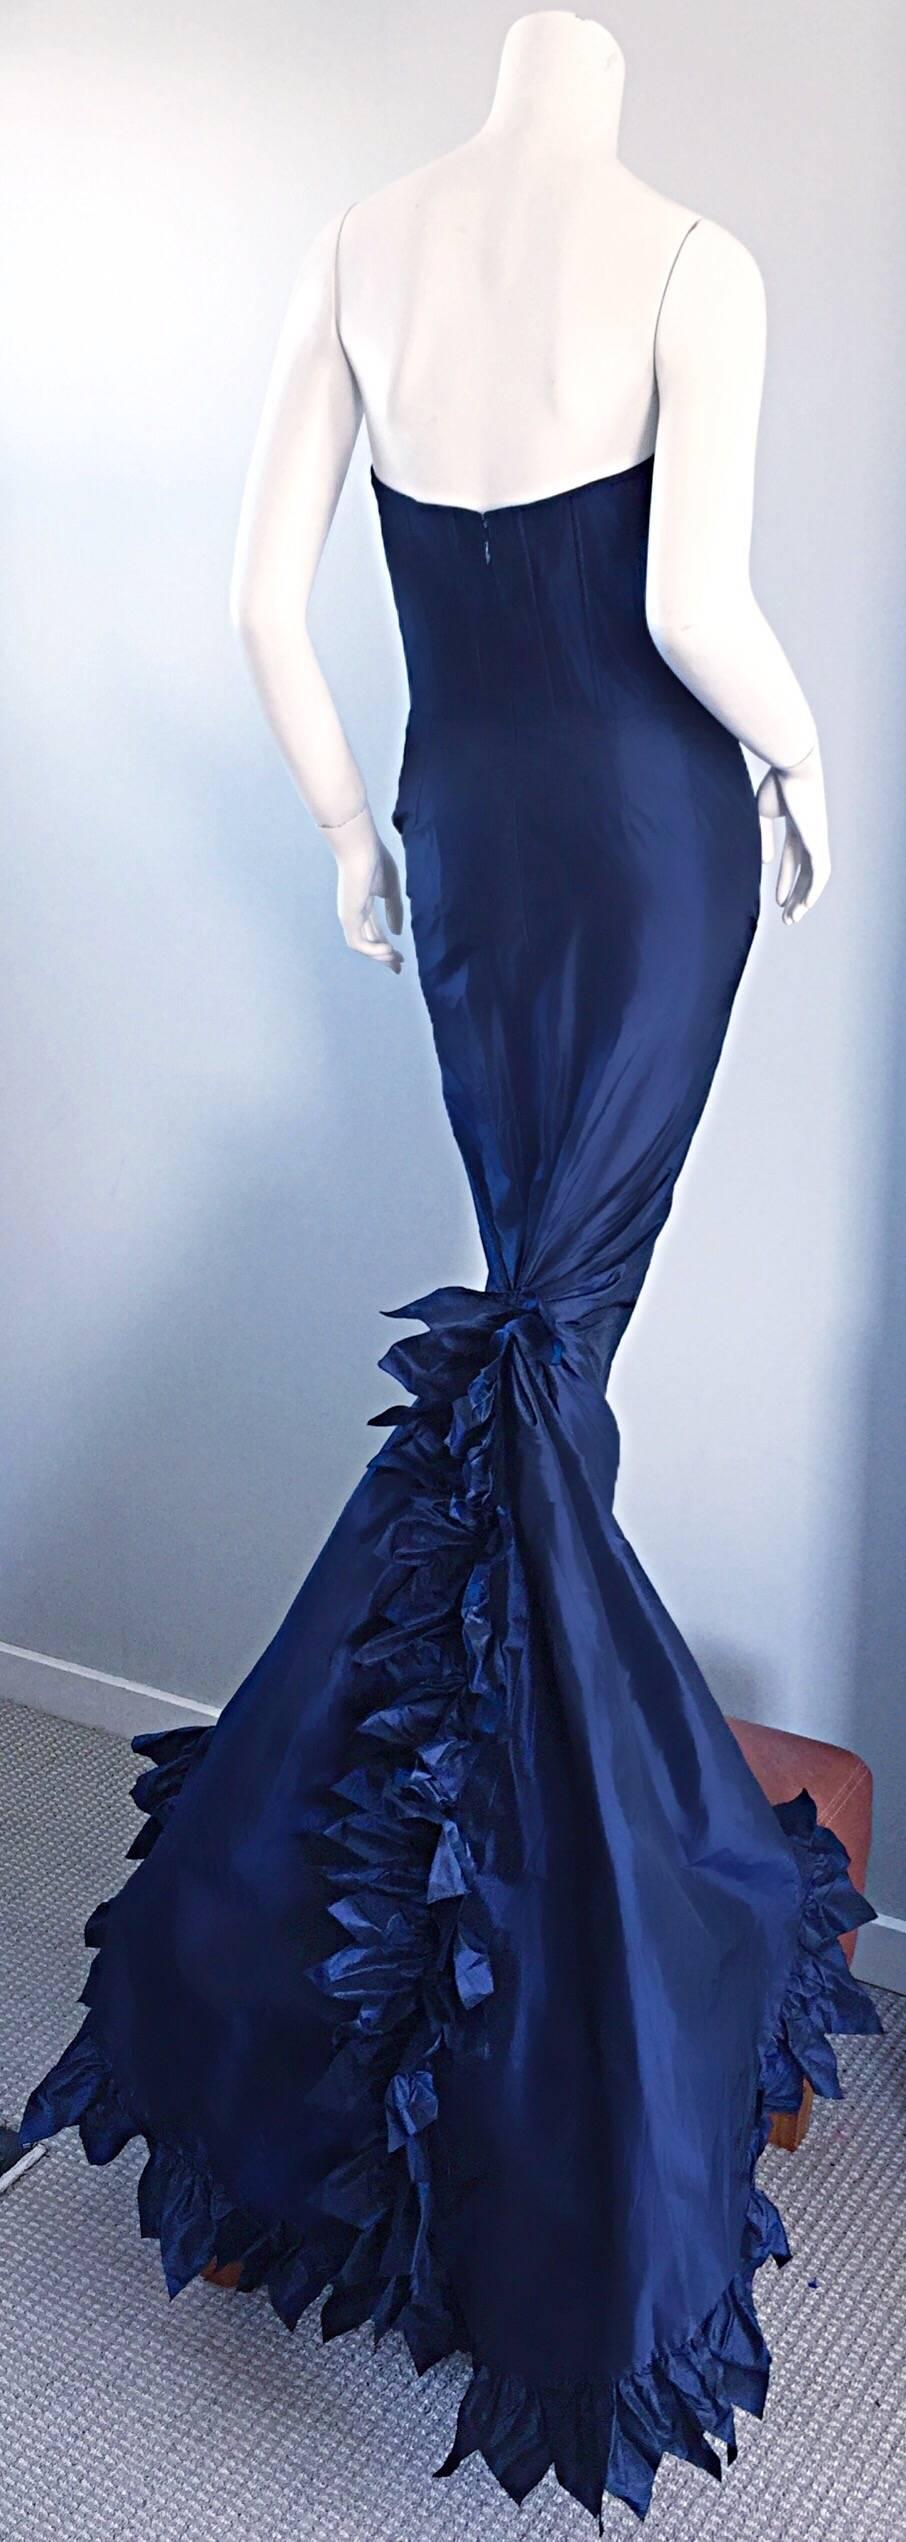 Absolutely breathtaking vintage OSCAR DE LA RENTA navy blue silk taffeta mermaid evening dress, with incredible Avant Garde origami train! Boned strapless bodice, with an intricate attached couture quality mermaid skirt. Flared train with origami